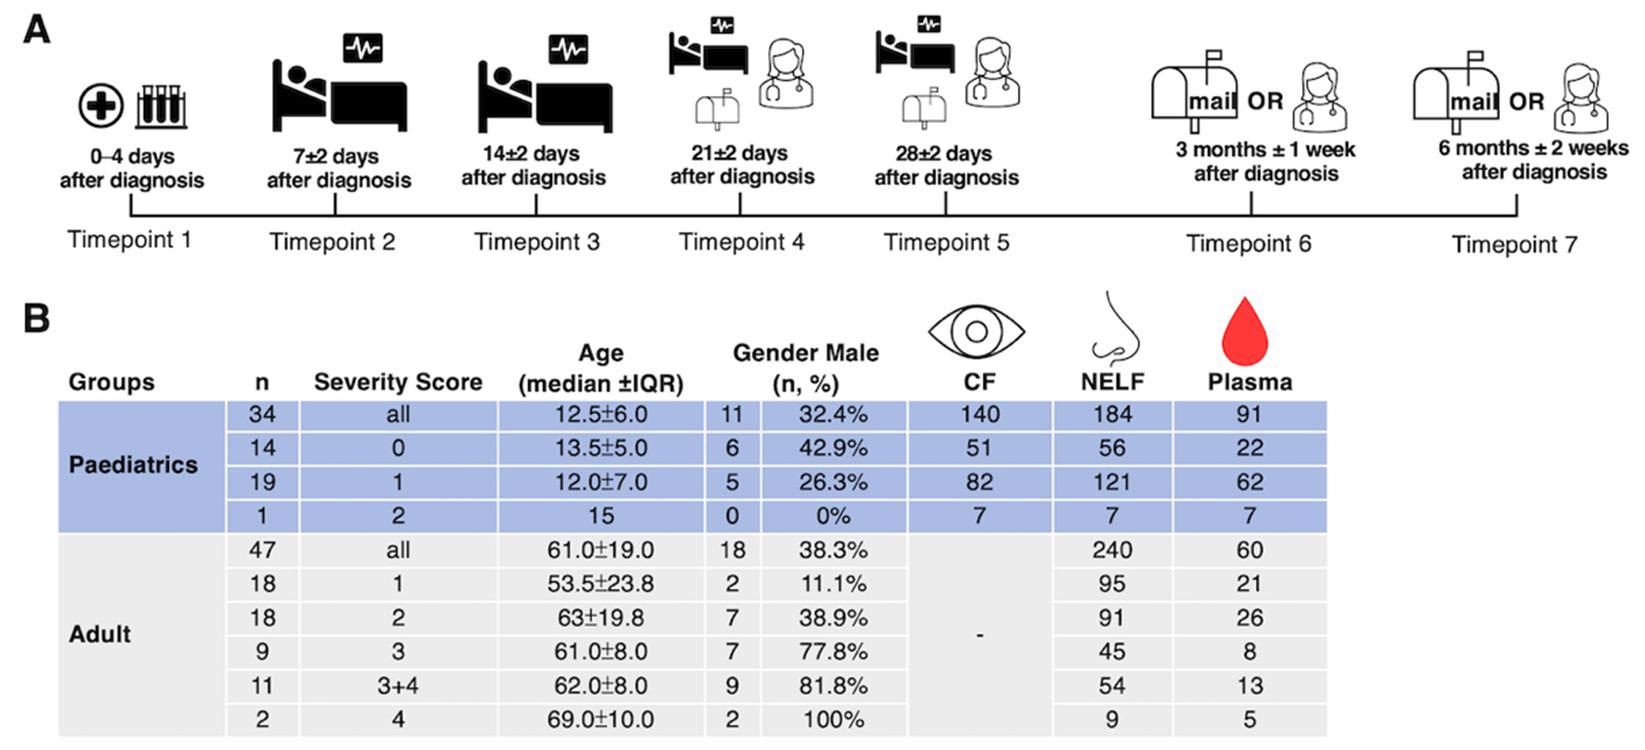 Study design and demographics. (A) A longitudinal sample collection, from the day of diagnosis (disease onset or the first day of a SARS-CoV-2 PCR positive result, whichever was earlier) to six months post-diagnosis, was conducted by healthcare workers during hospitalization and follow-up consultations for paediatric patients. Adult patients performed the self-collection of NELF samples after being discharged and mailed the samples to the laboratory. (B) The number of asymptomatic and symptomatic paediatric and adult subjects, their severity score (0: asymptomatic; 1: mild; 2: moderate; 3: severe; 4: critically ill), age, gender, and the number of CF, NELF and plasma samples collected are shown.